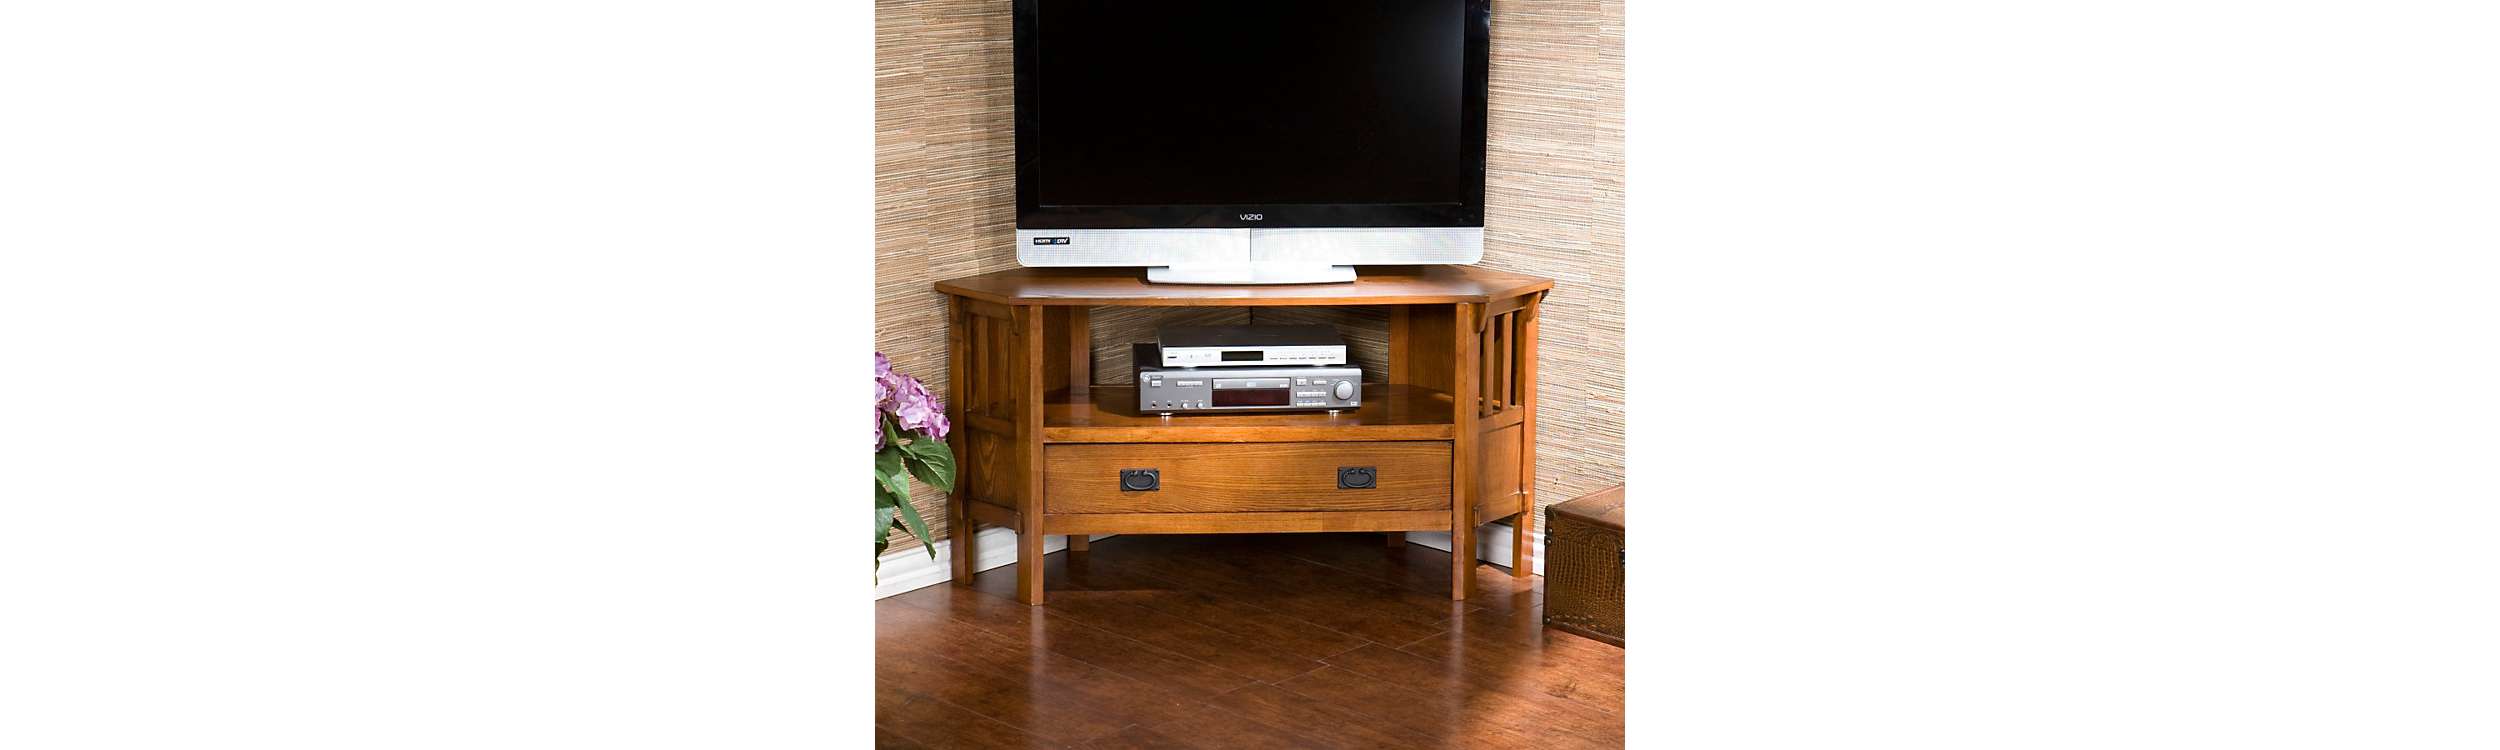 New Models Of Tv Stand